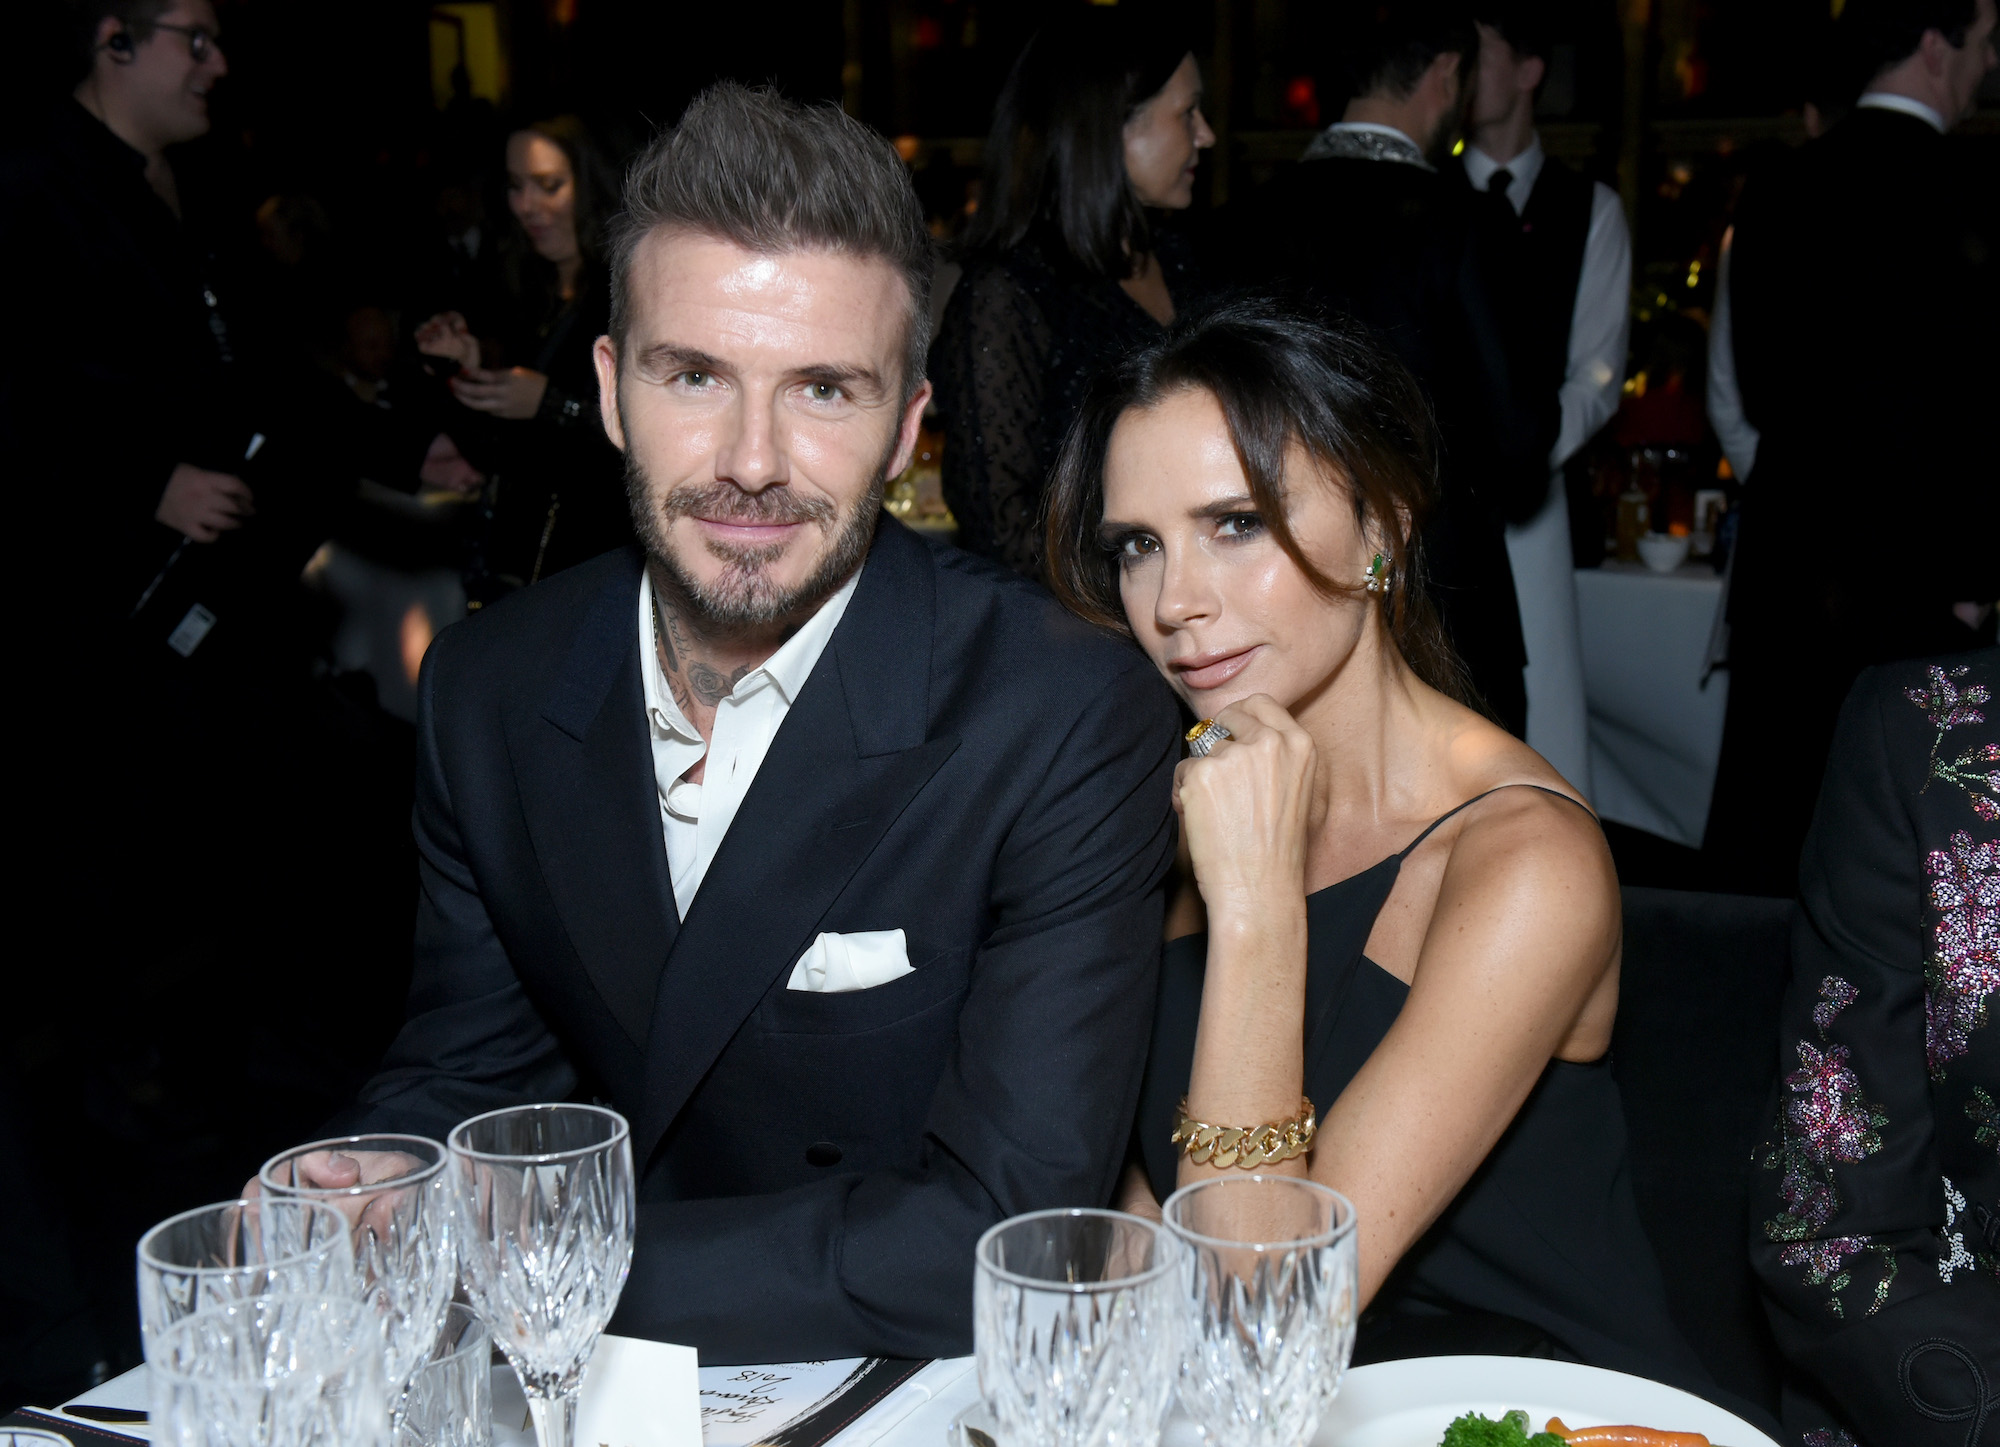 David Beckham Once Dropped Seven Figures On A Posh Birthday Gift For Victoria Beckham